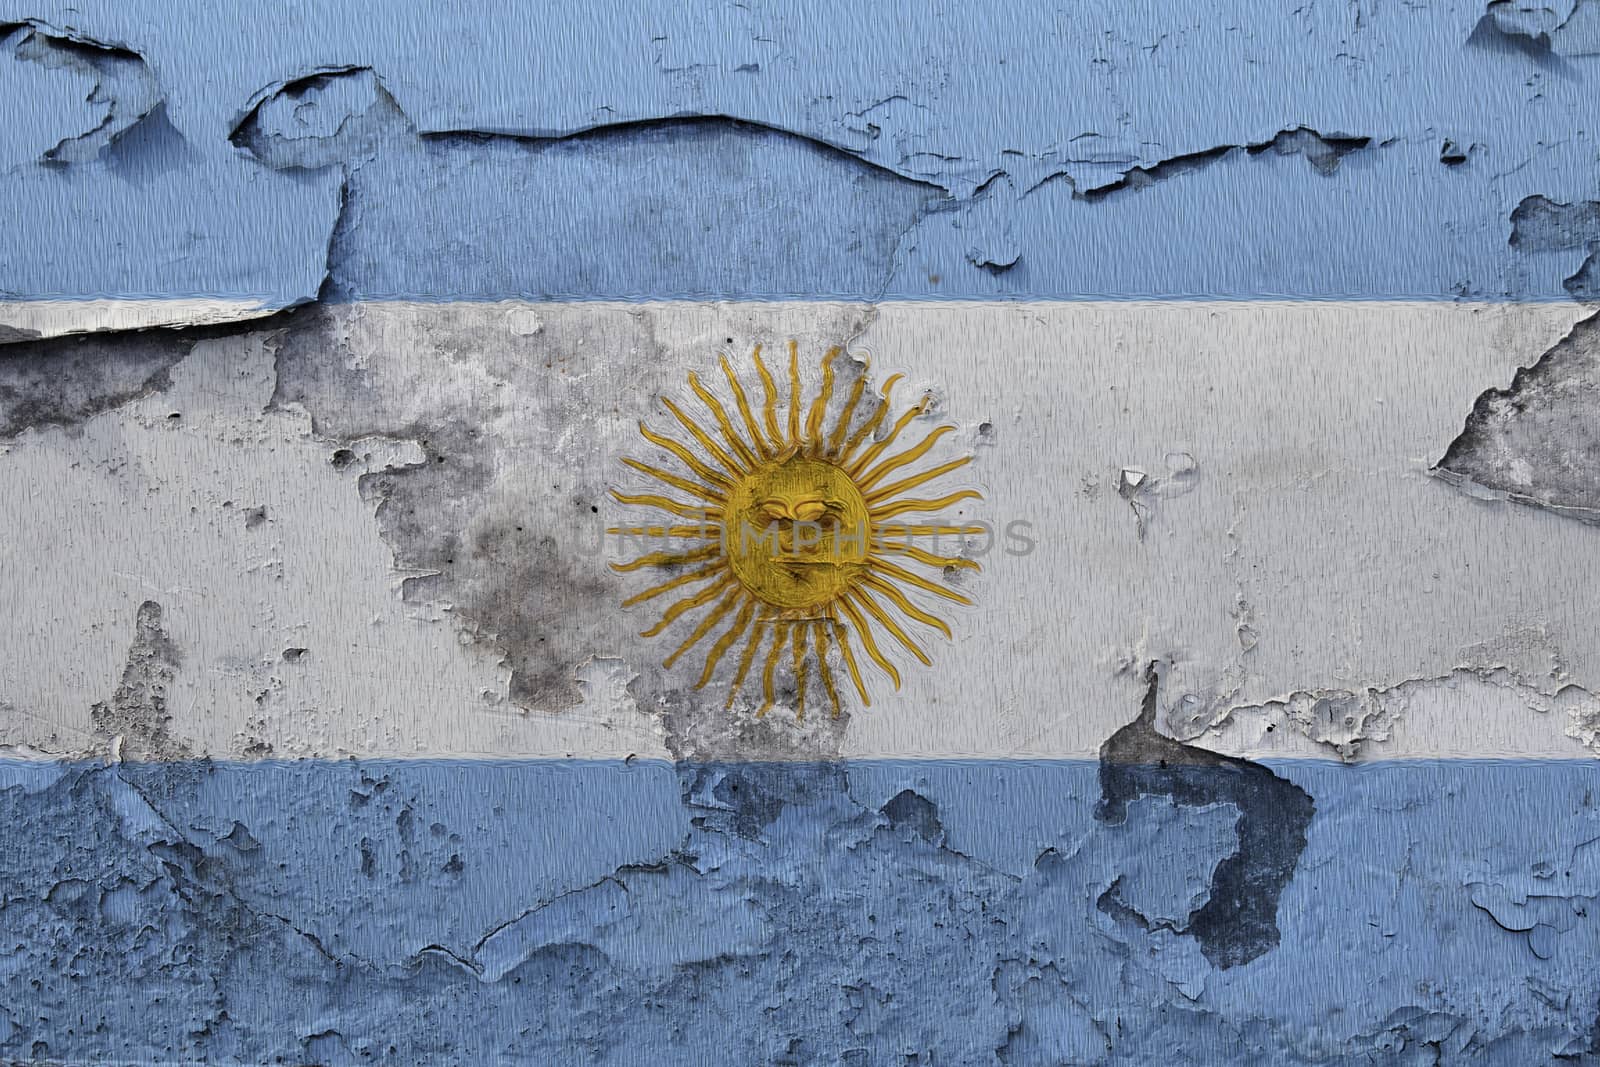 Argentina flag painted on the cracked grunge concrete wall